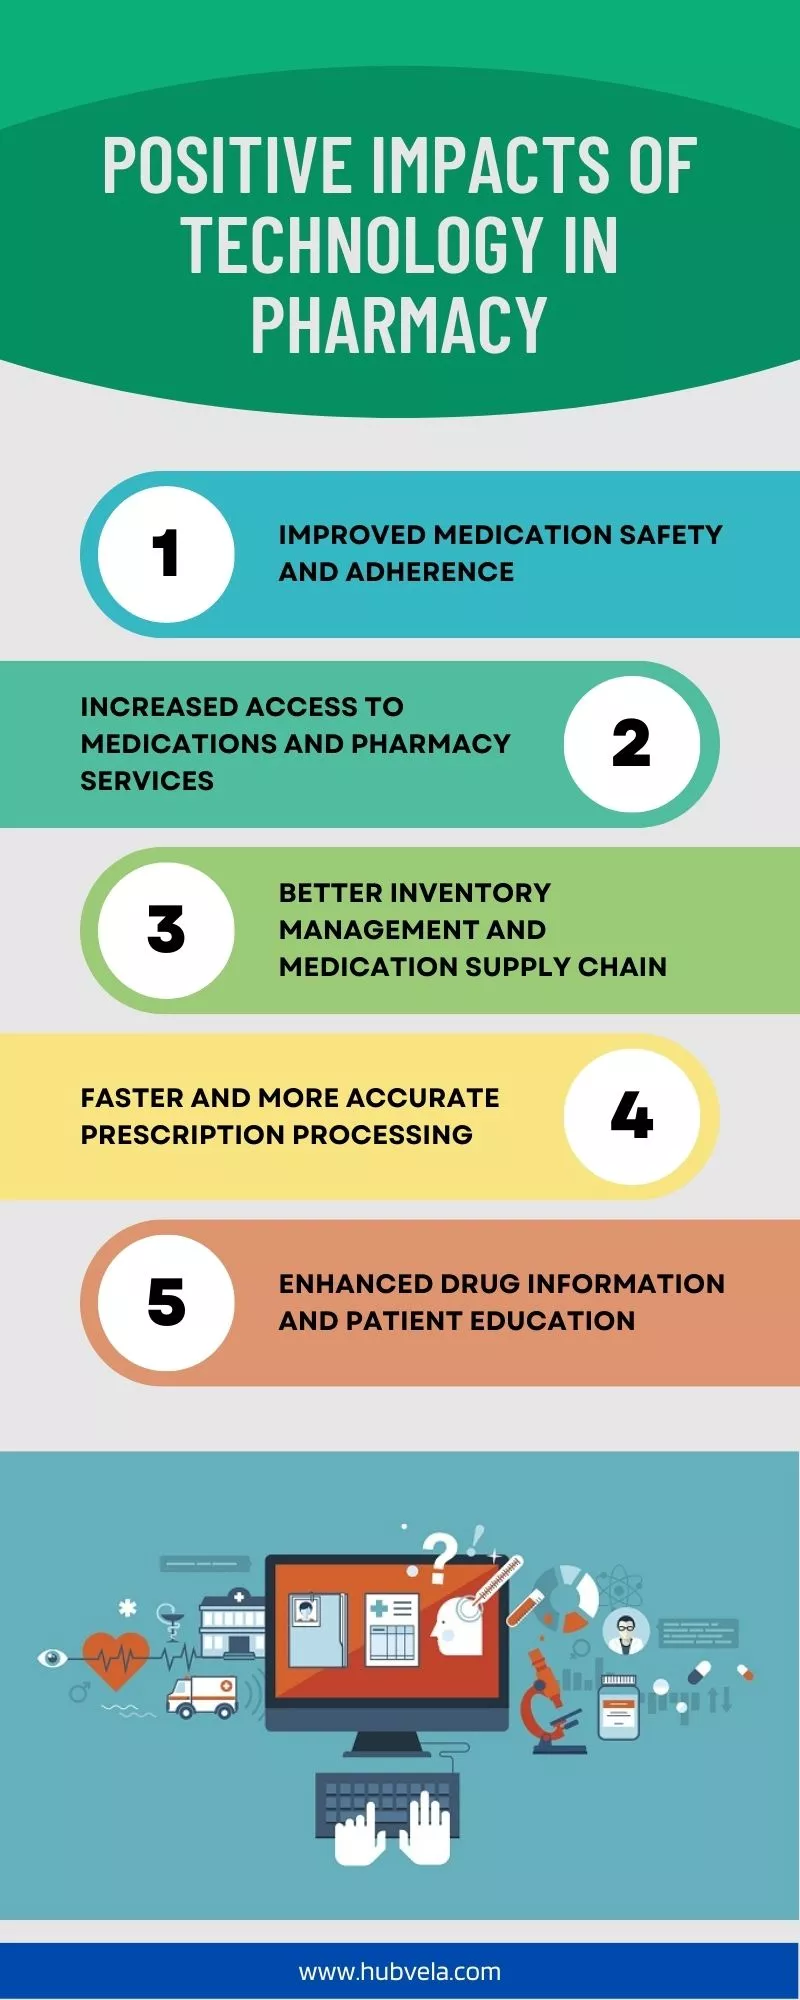 Positive Impacts of Technology in Pharmacy infographic